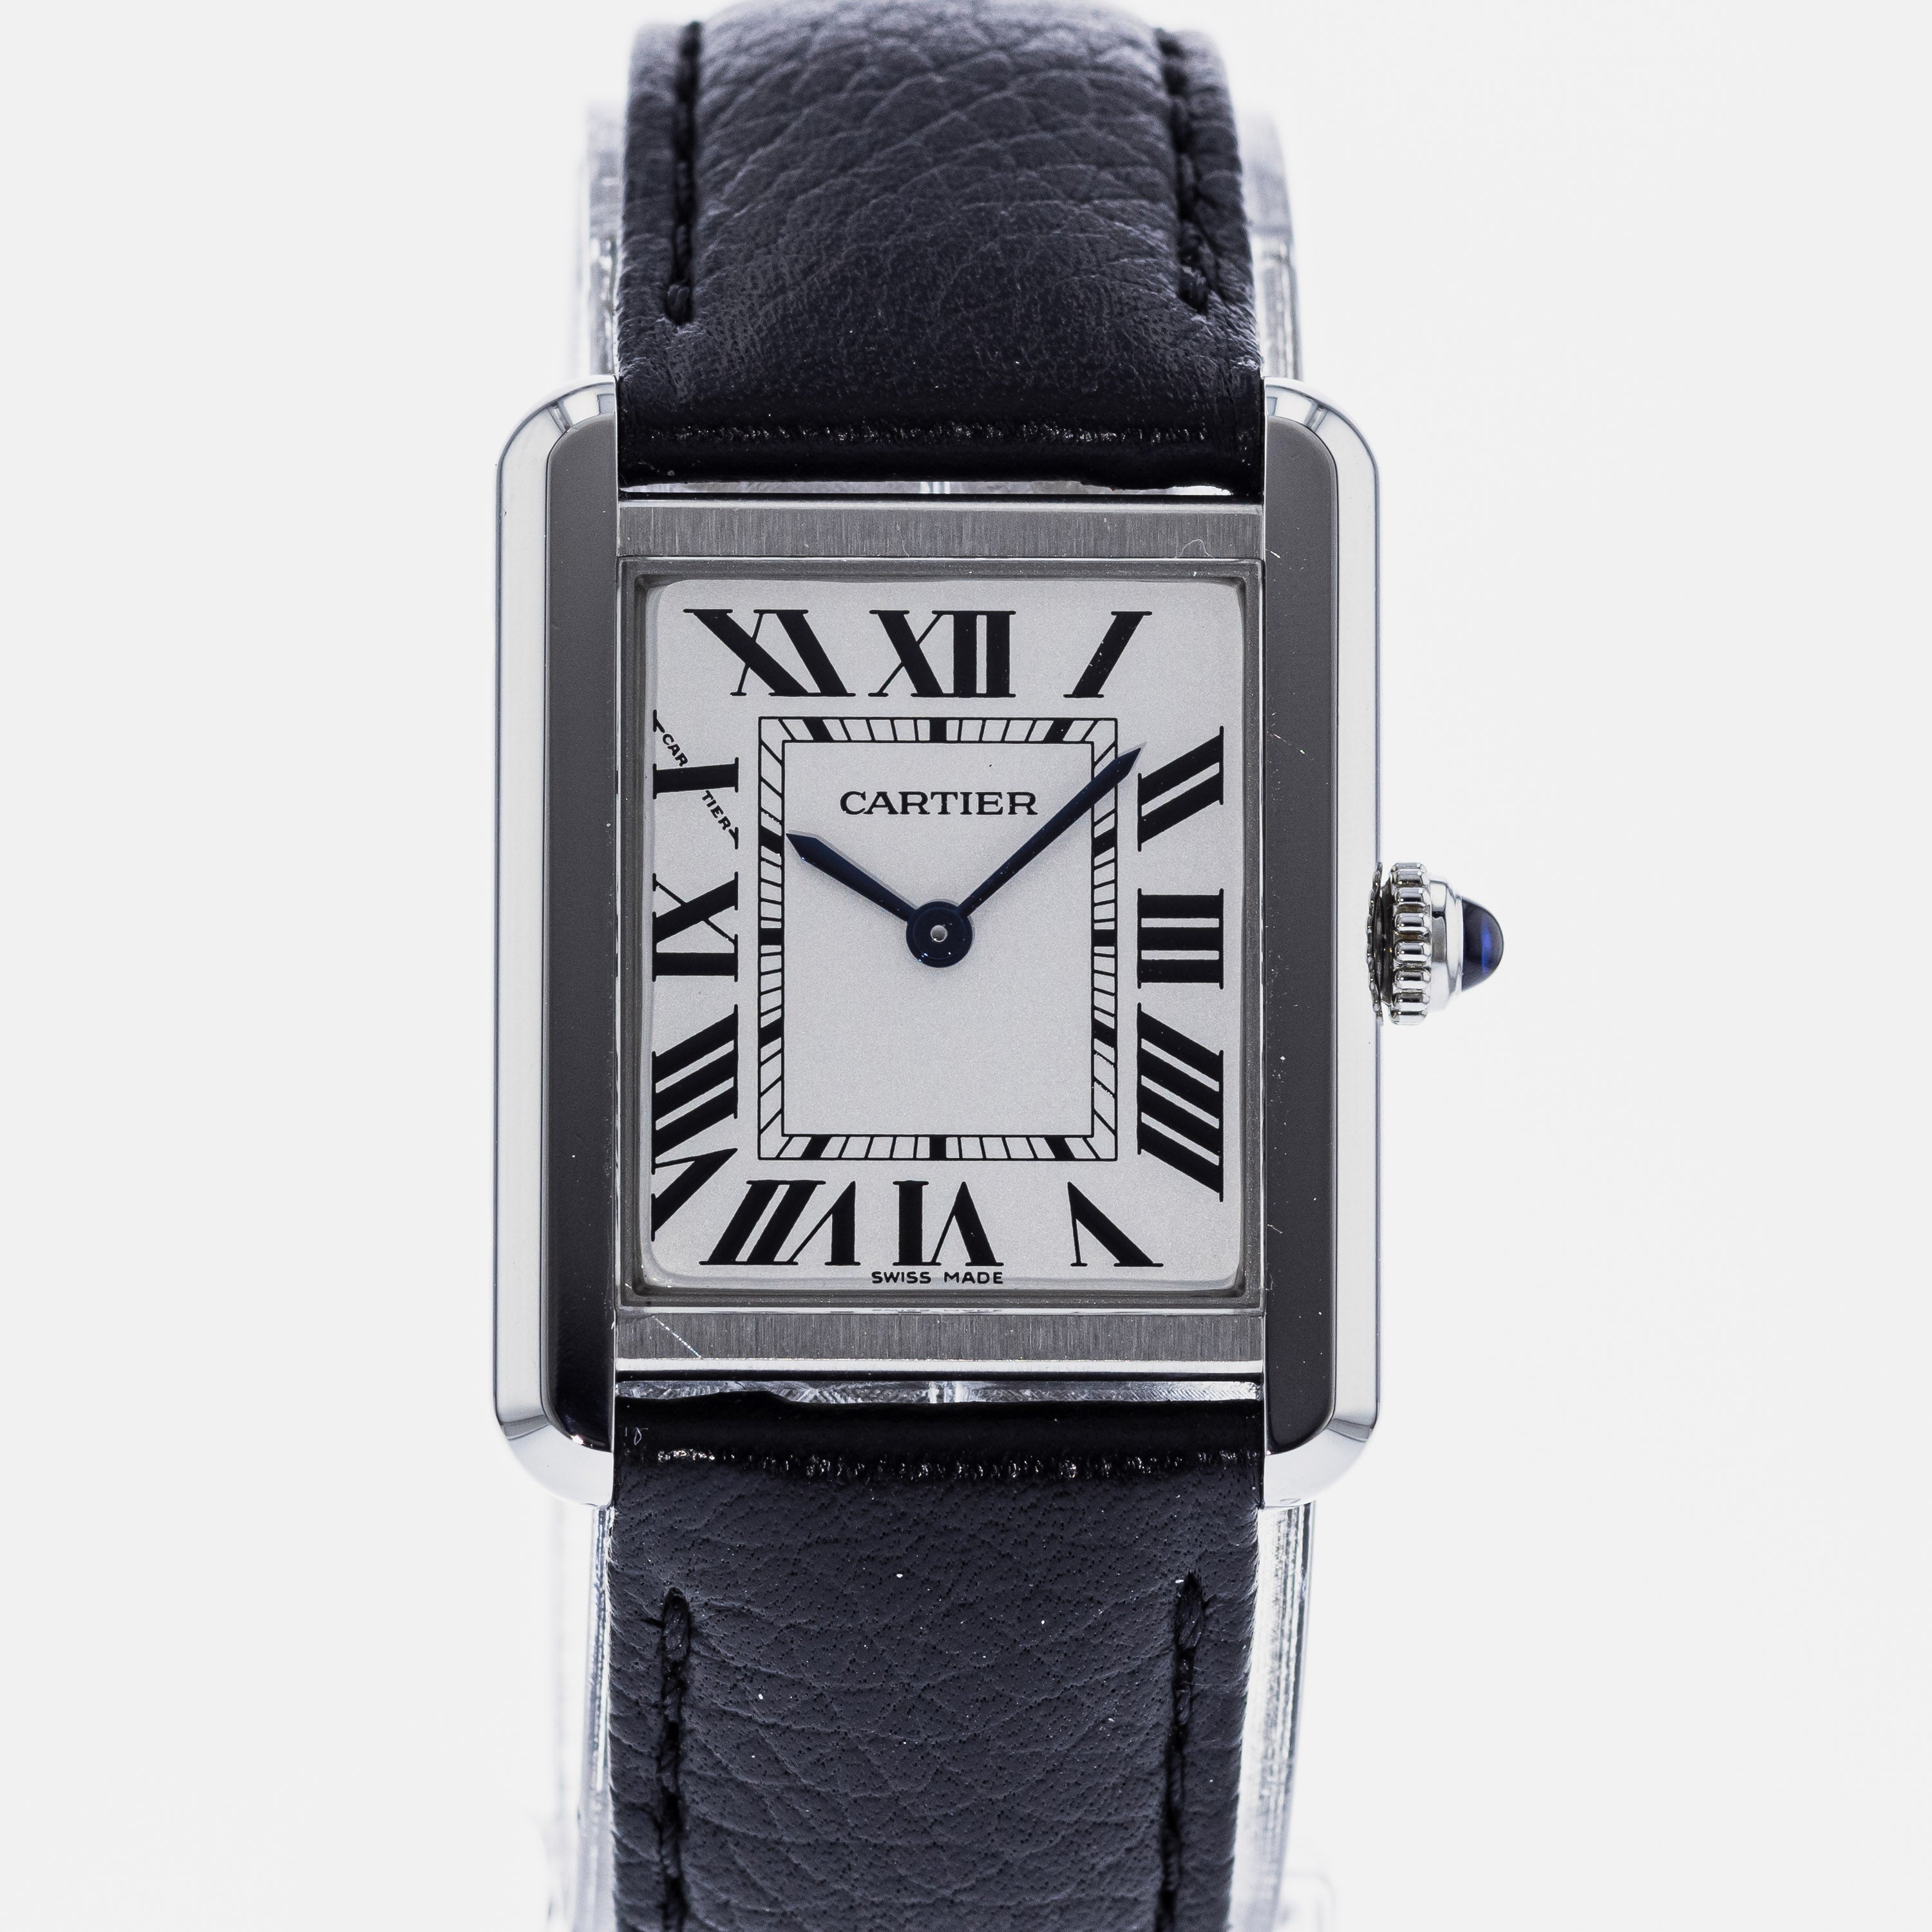 Cartier Tank Solo WSTA0030 – Every Watch Has a Story